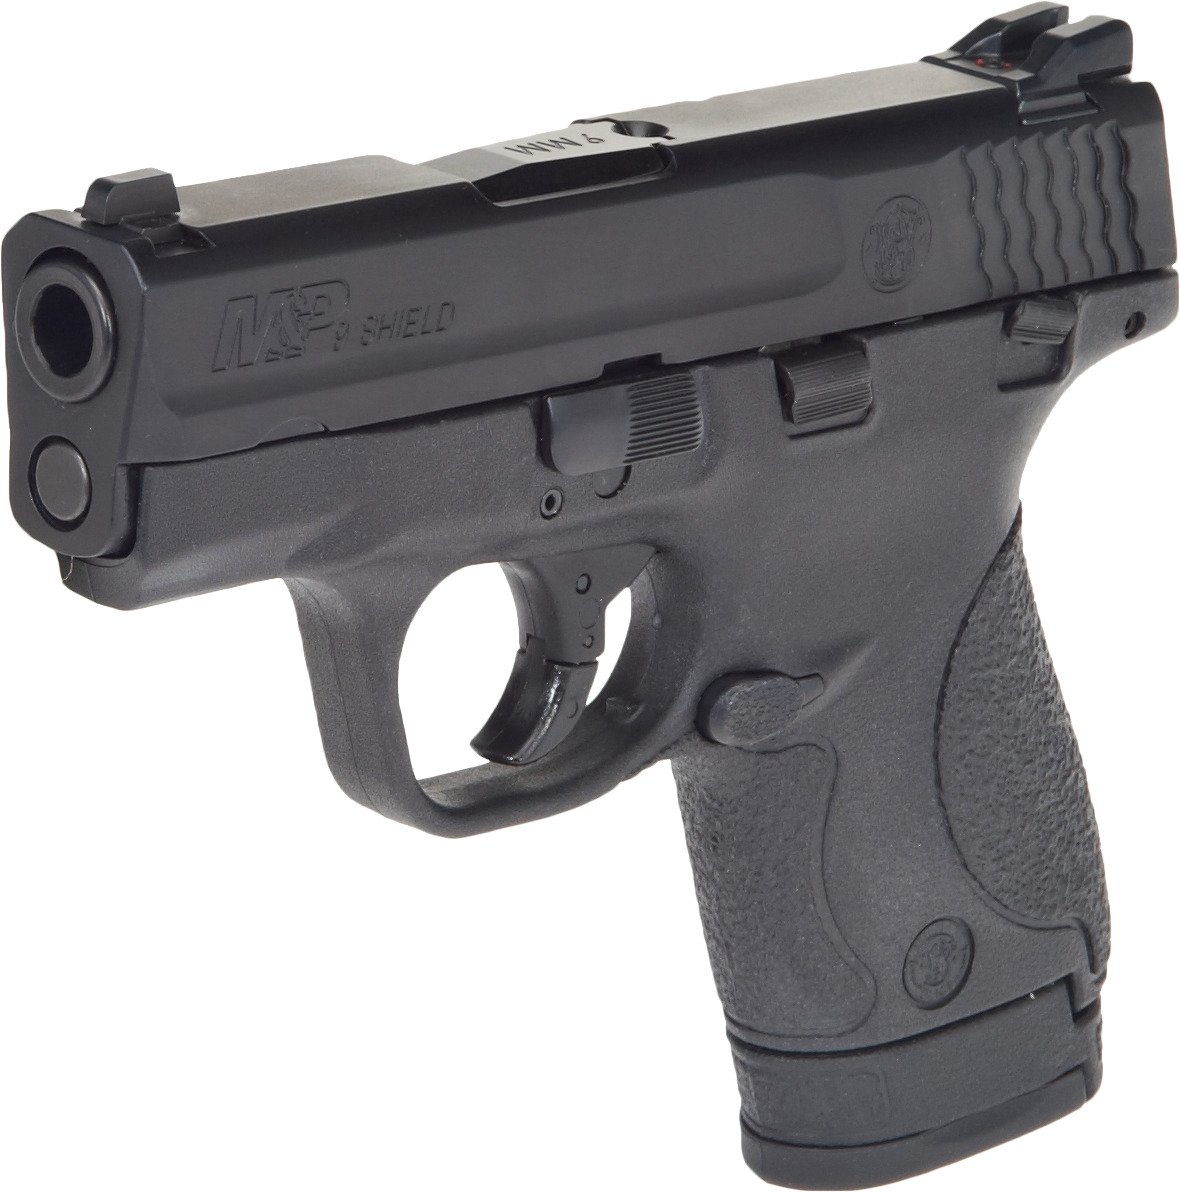 Smith Wesson M P9 Shield 9mm Compact 8 Round Pistol Academy